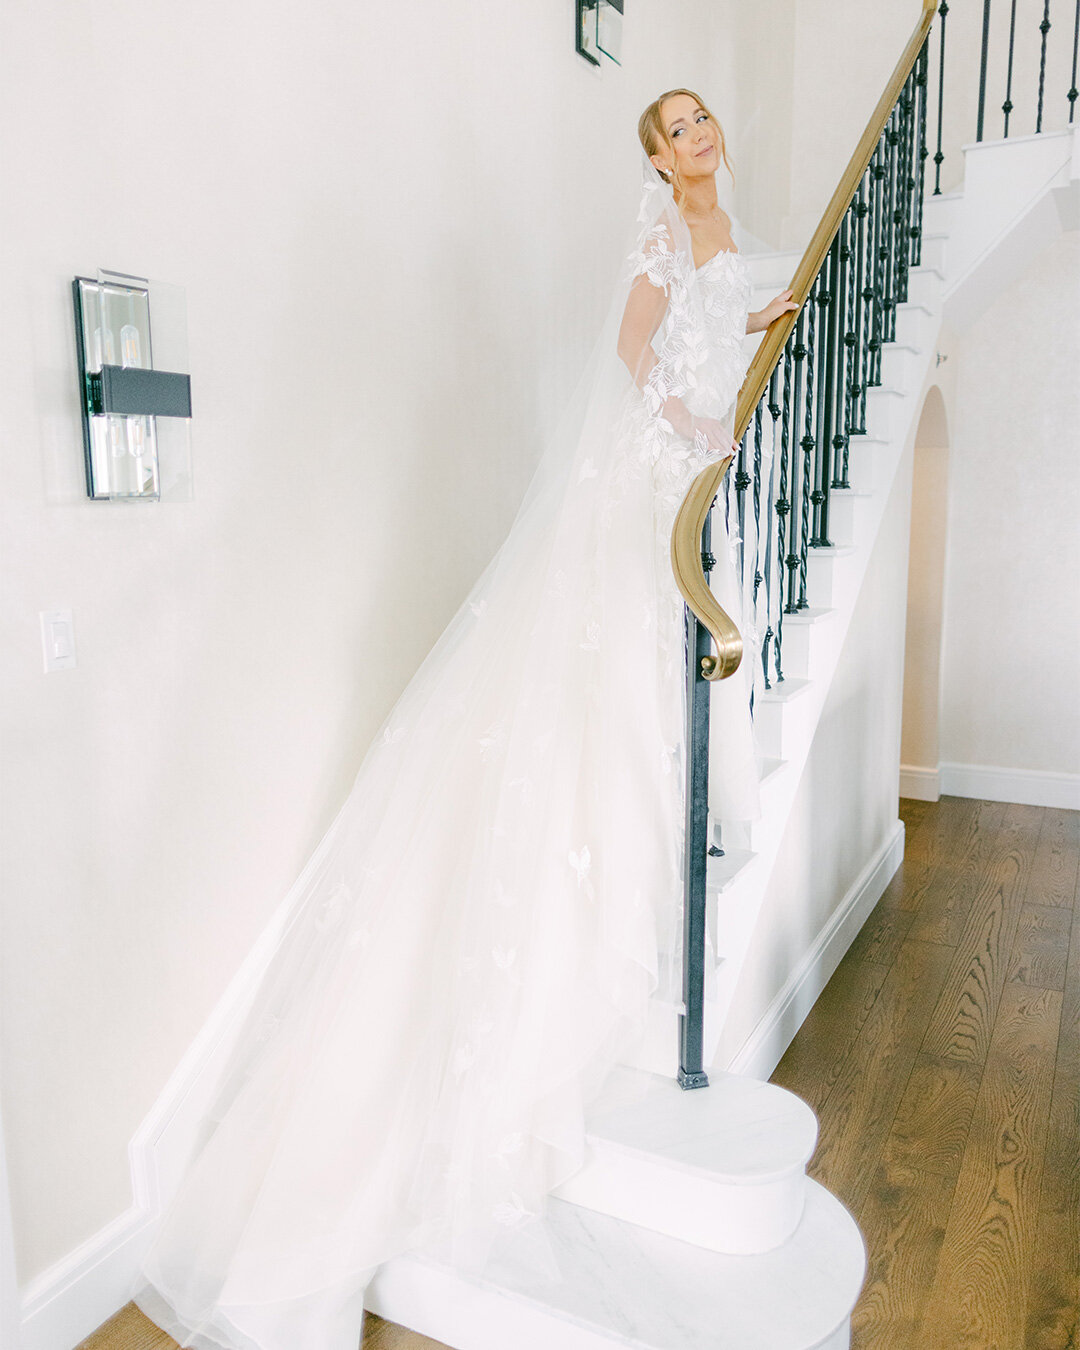 Lovely Amanda in one of my favorite hotel suites in Chicago. Big dresses and big stairs are like wine and cheese. Put 'em together, it just makes sense!

Planning by @lolaeventpros @lolacarlyc
Dress by @eliesaabbridal 
H/MU by @bsansostiartistry
Hote